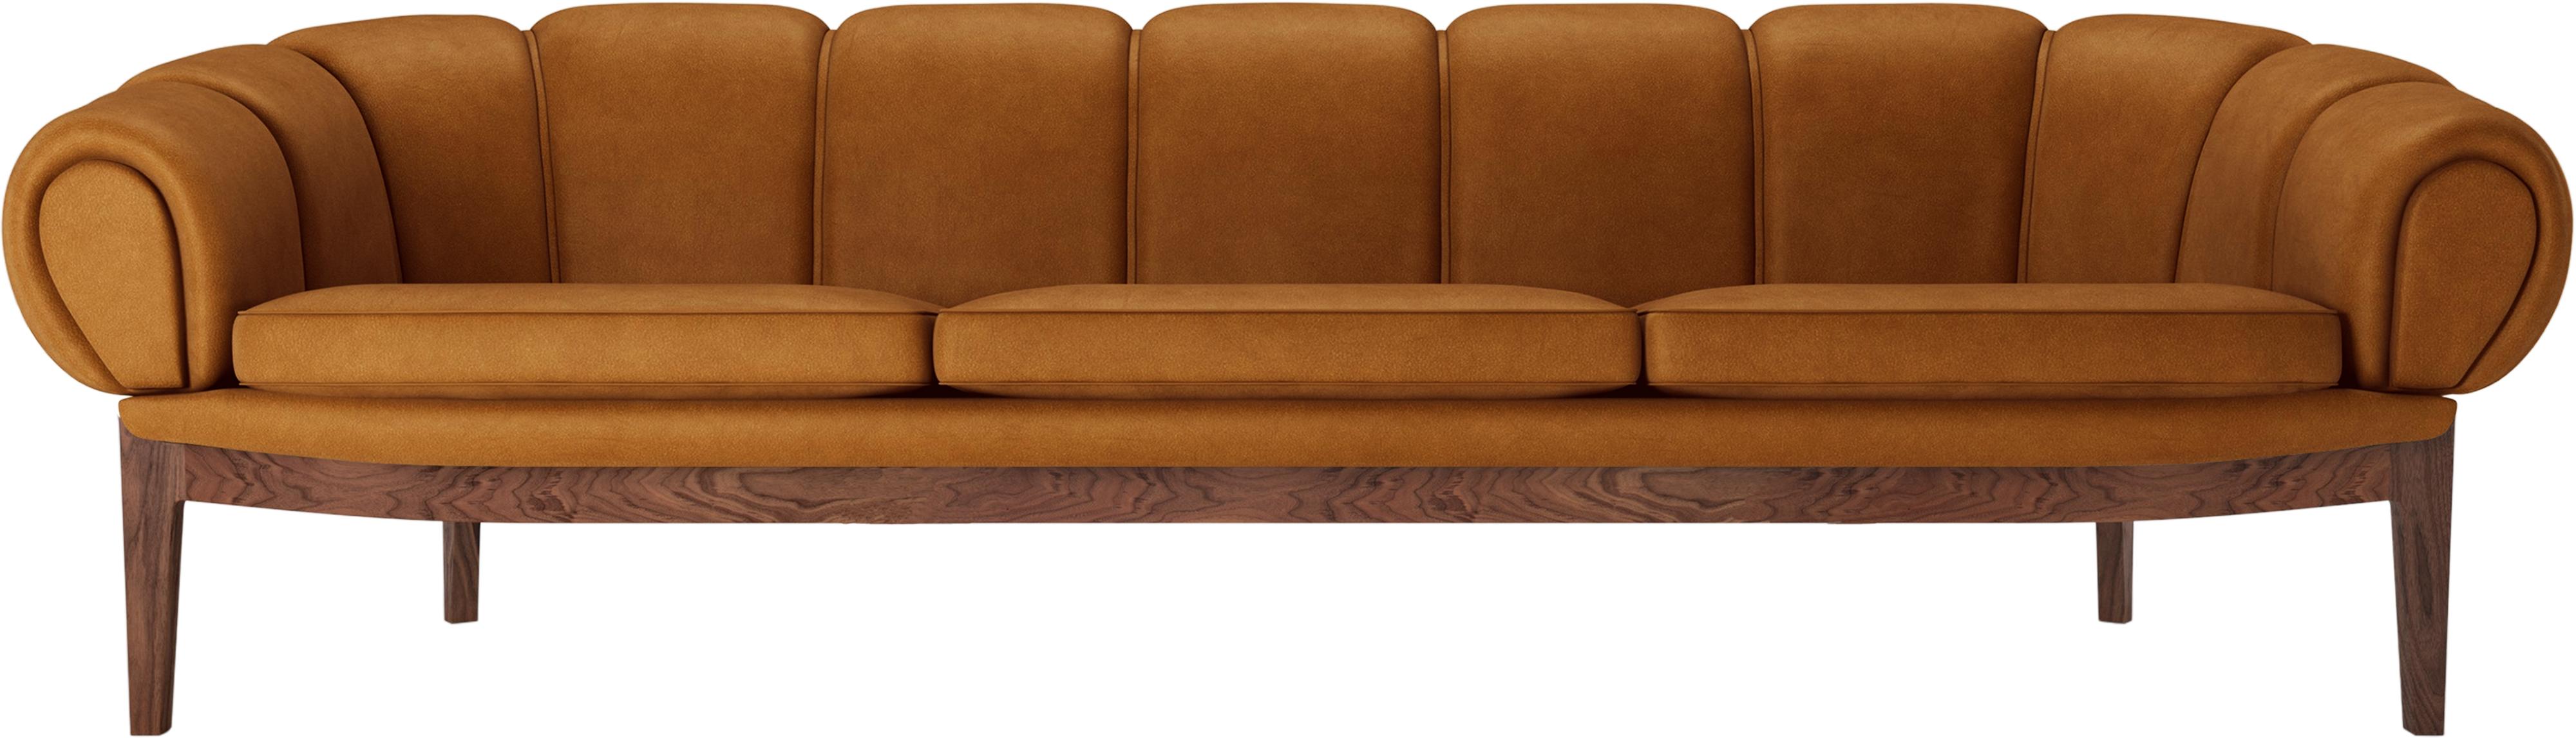 Leather 'Croissant' sofa by Illum Wikkelsø for GUBI with walnut legs.

Playful, voluptuous and expertly crafted, the newly reimagined Croissant Collection from GUBI makes a powerful statement in any interior setting and an heirloom to treasure for